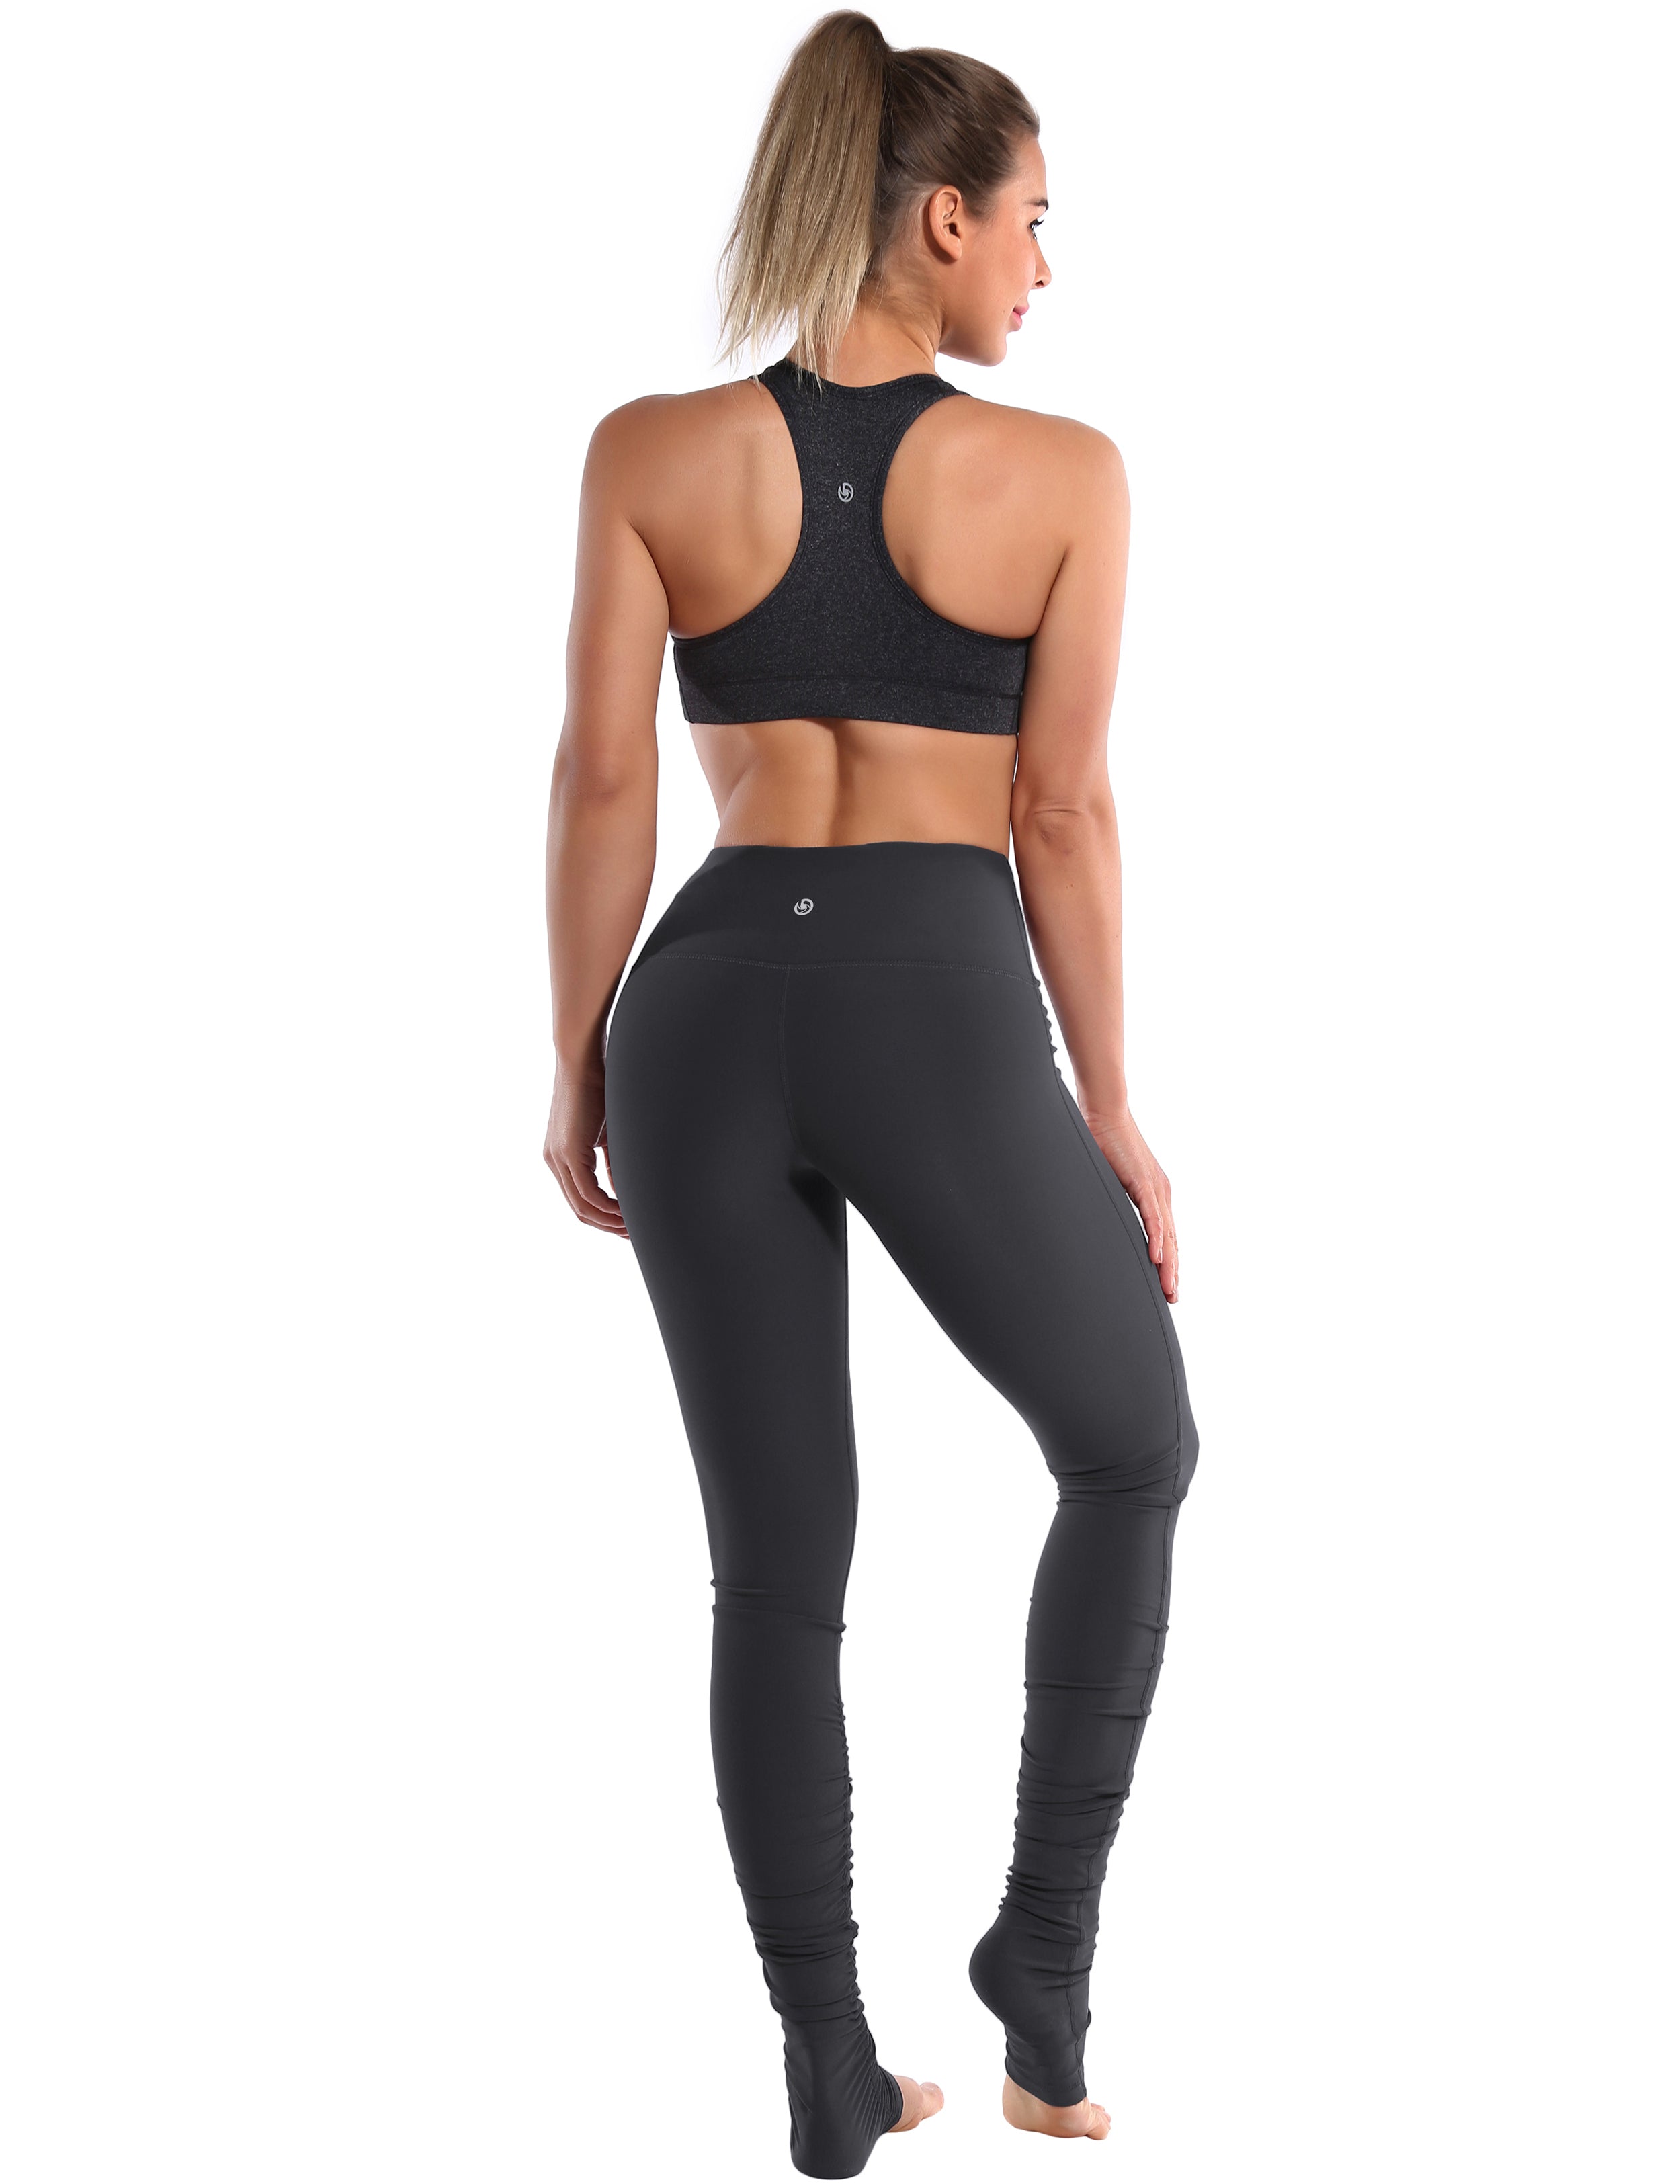 Over the Heel Biking Pants shadowcharcoal Over the Heel Design 87%Nylon/13%Spandex Fabric doesn't attract lint easily 4-way stretch No see-through Moisture-wicking Tummy control